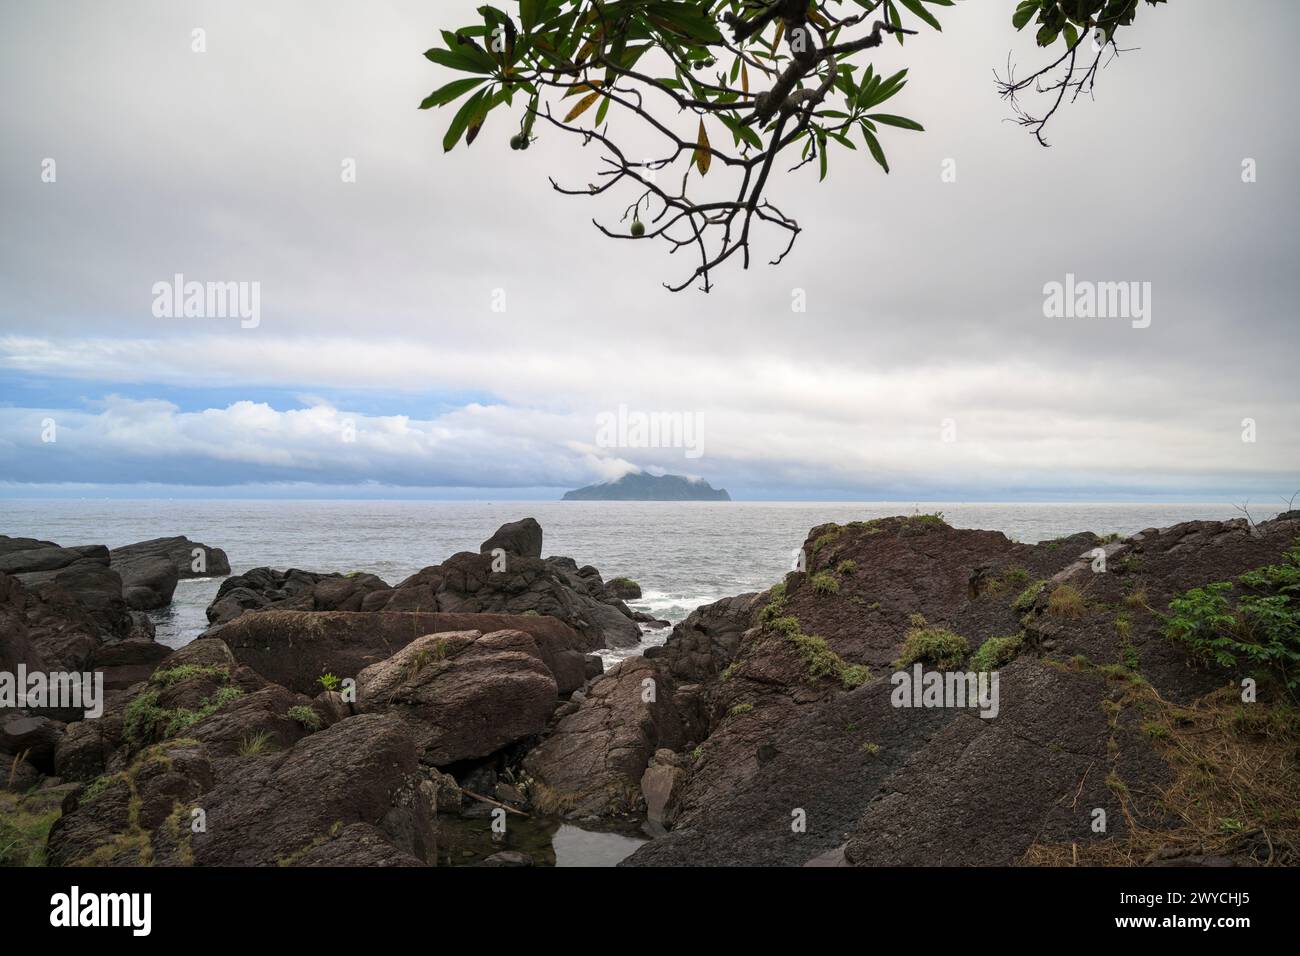 Foreground greenery frames the tranquil view of a distant island amidst calm sea waters and a cloudy sky Stock Photo